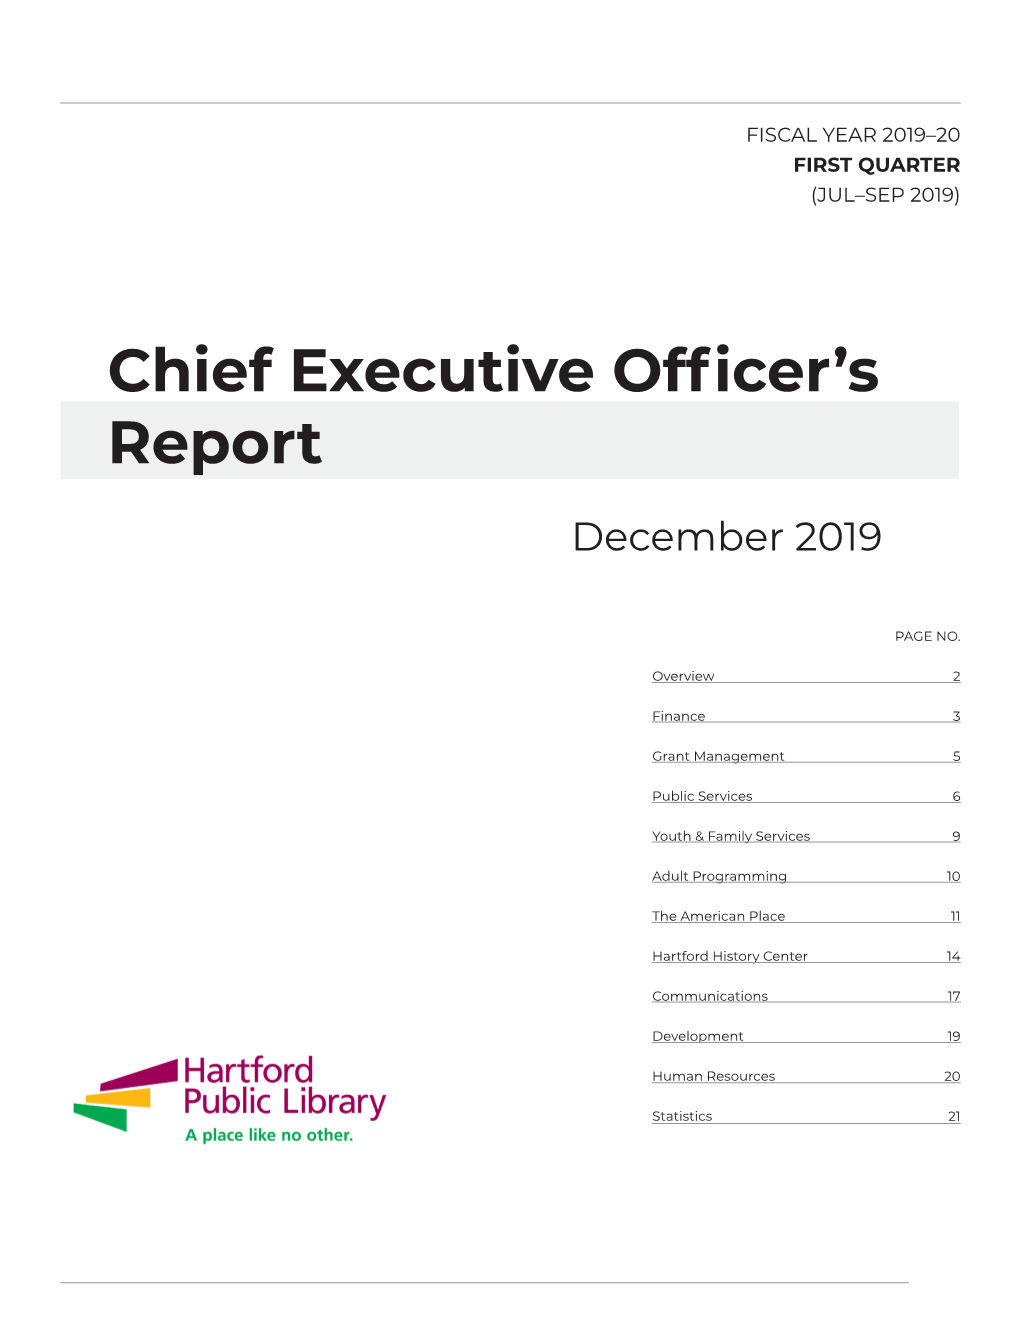 Chief Executive Officer's Report